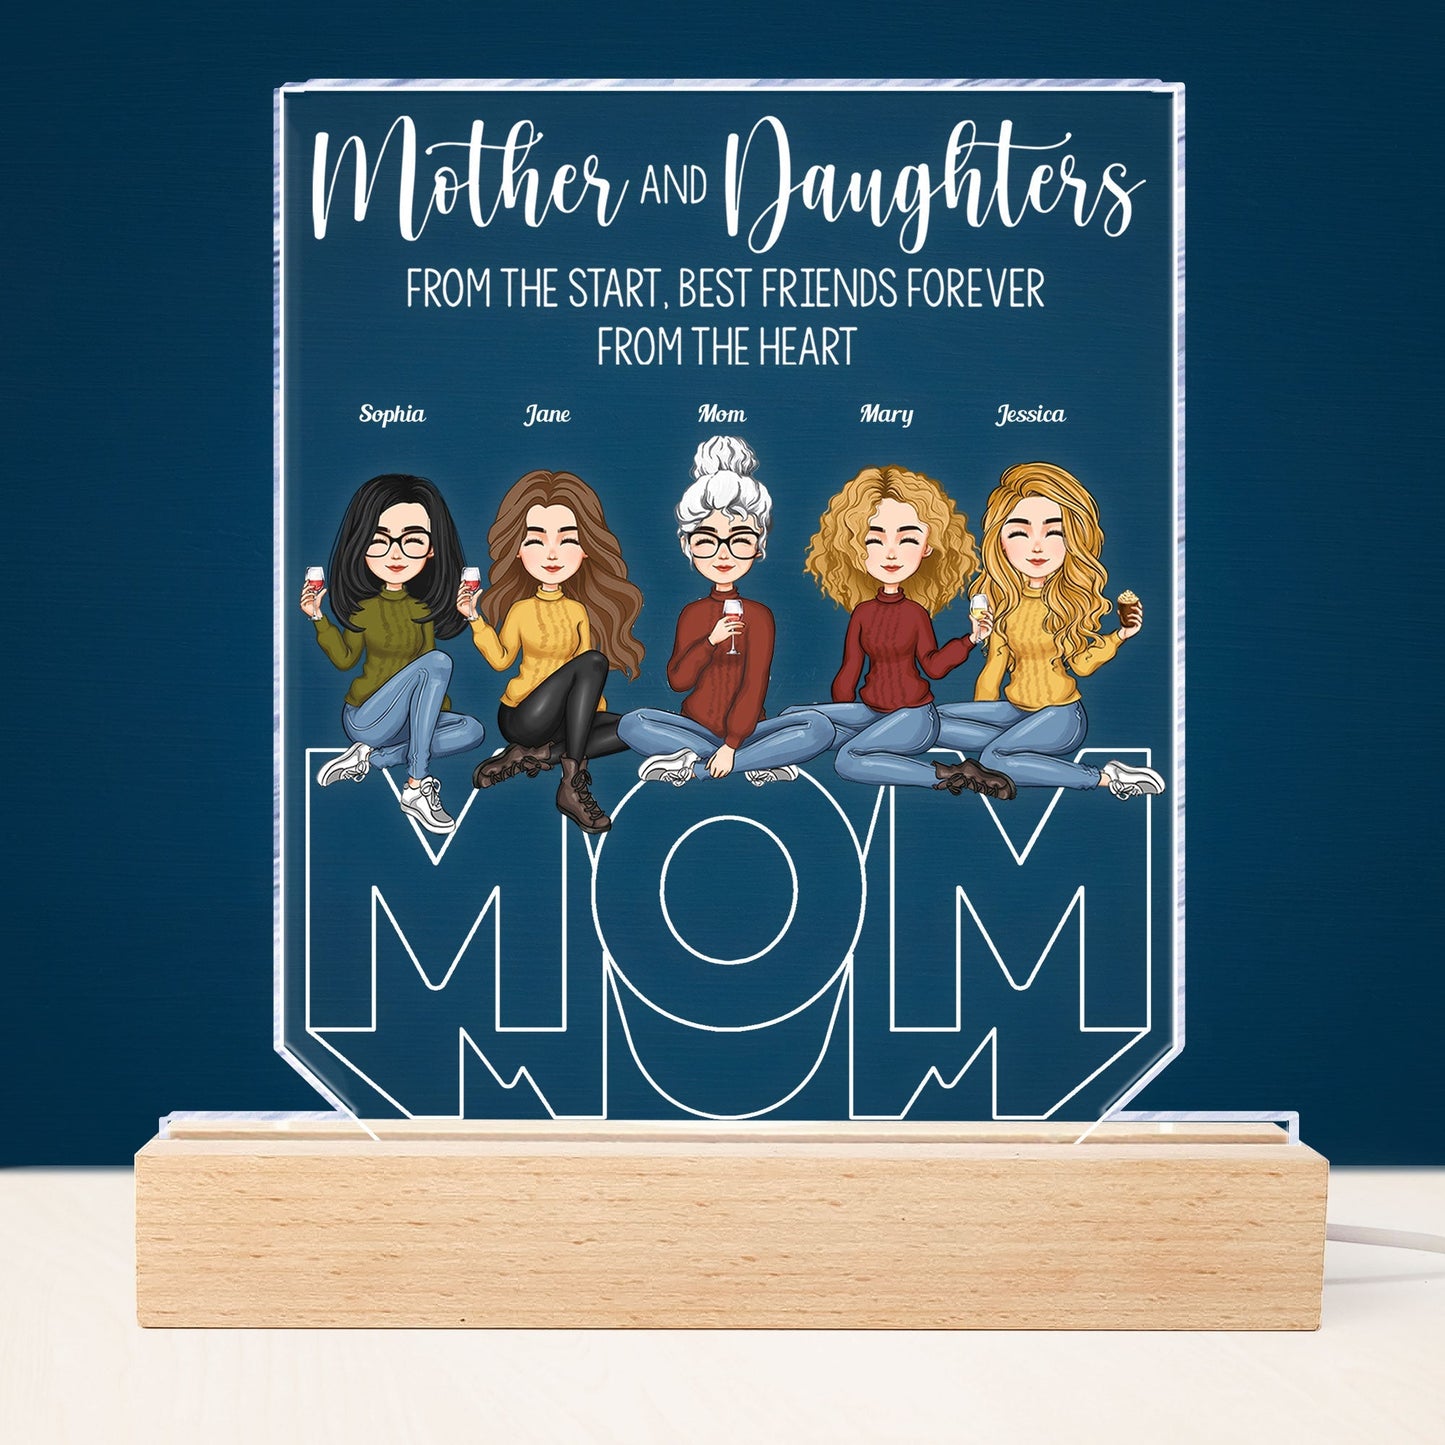 Mother And Children Best Friends Forever - Personalized Personalized 3D Led Light Wooden Base - Birthday Gift For Mom, Children, Sons, Daughters